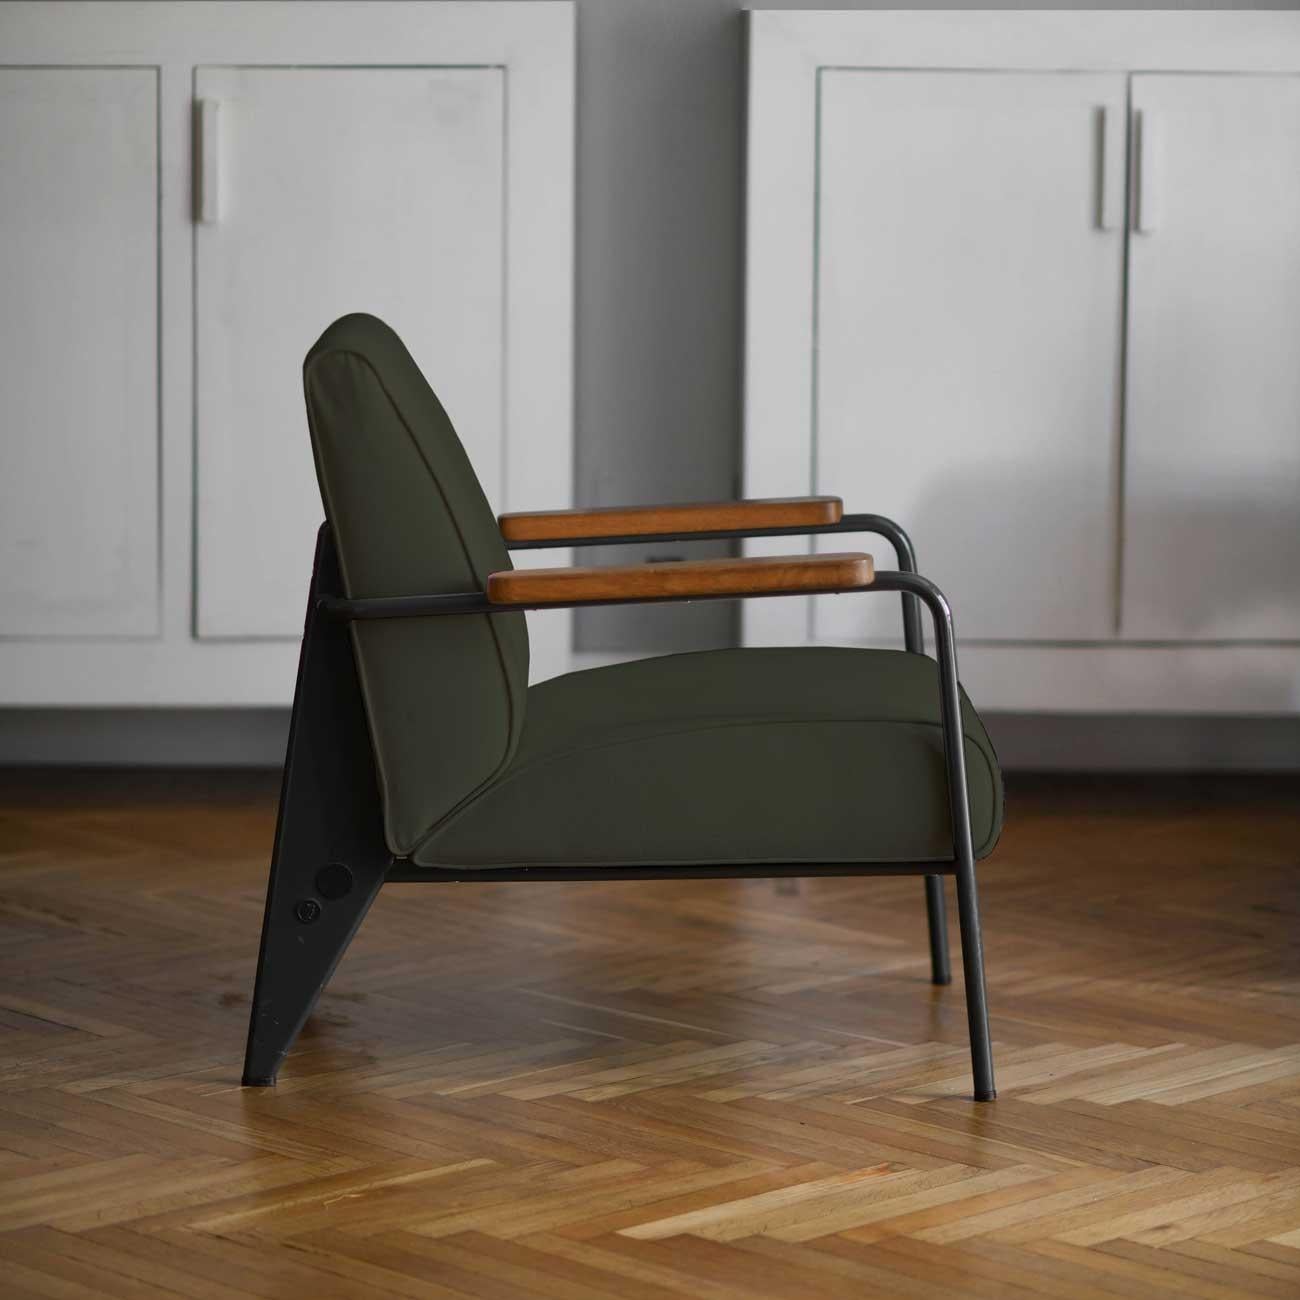 Designed by Jean Prouvé in 1939 Fauteuil de Salon is a typical example of the structural aesthetic that distinguishes his projects.
Fauteuil de Salon joins simple planes into a unified architectural object with a comfortable seat surface and